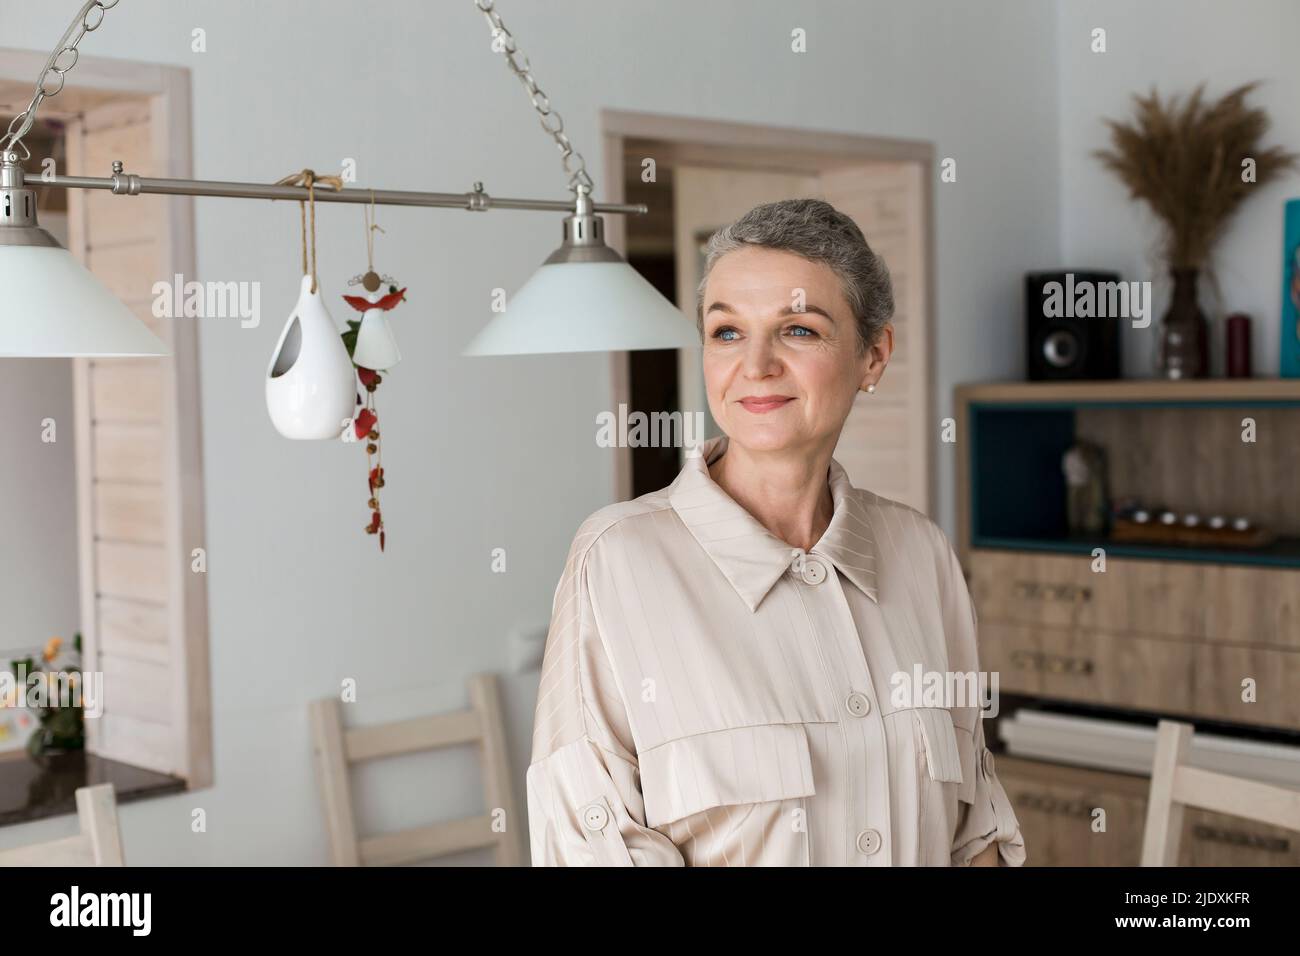 Confident mature woman with short grey hair at home Stock Photo